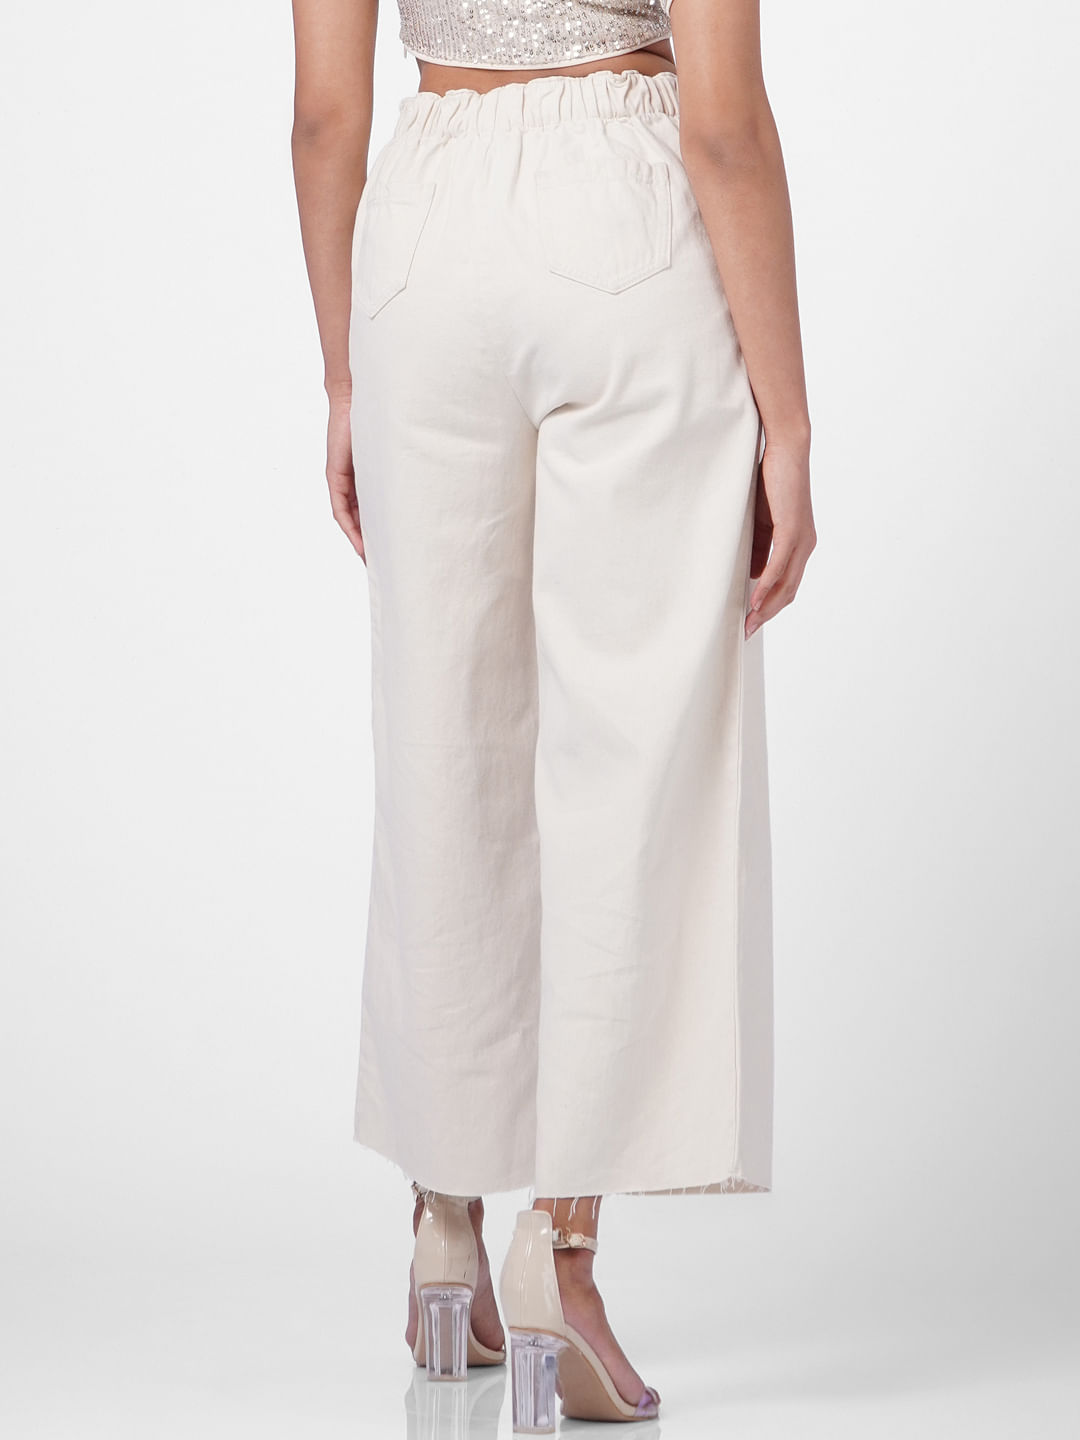 Buy Stylish Denim Culottes Collection At Best Prices Online